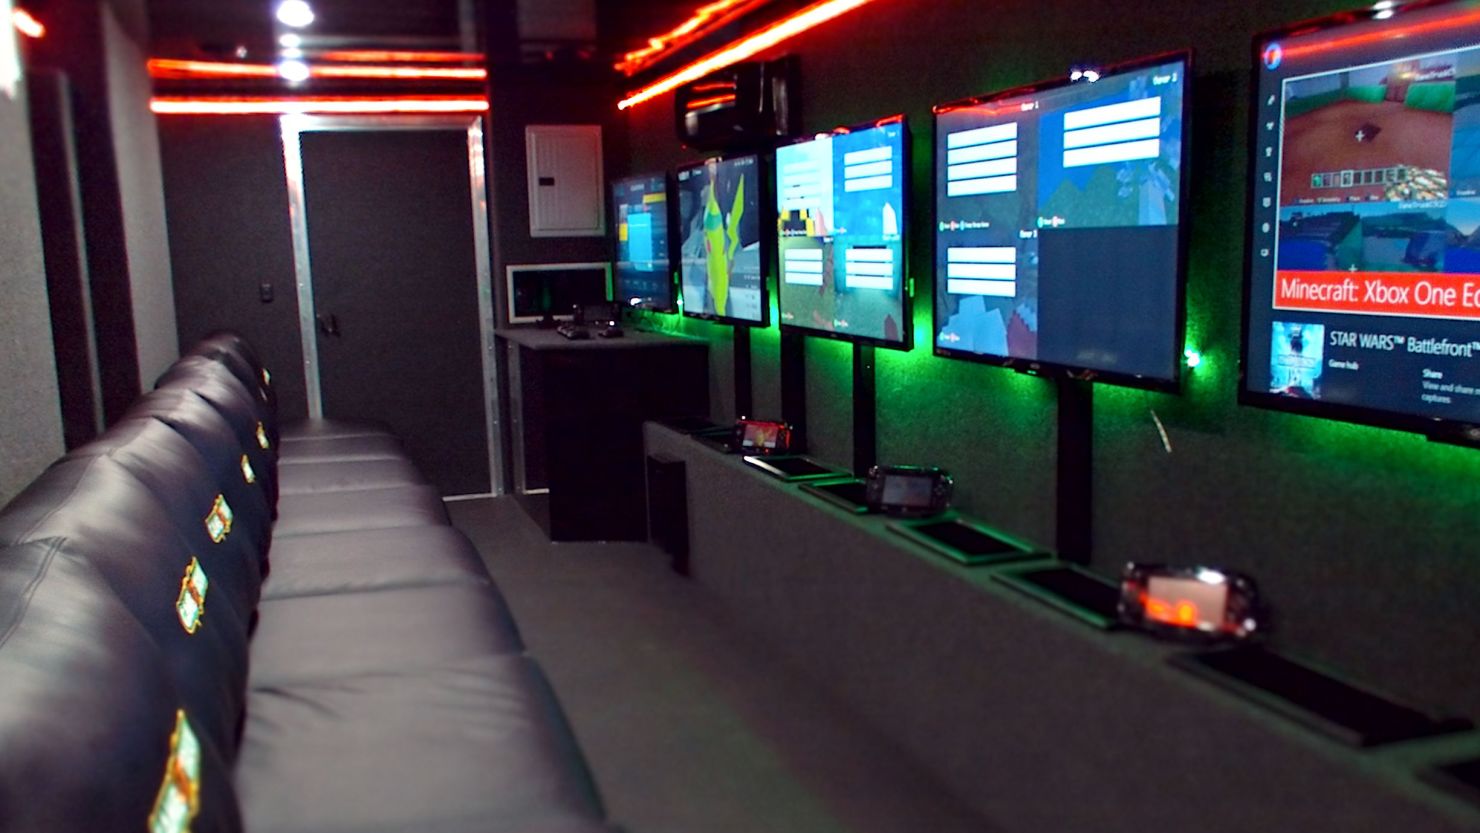 This photograph provided by GameTruck shows the interior of one of the company's video game trailers.